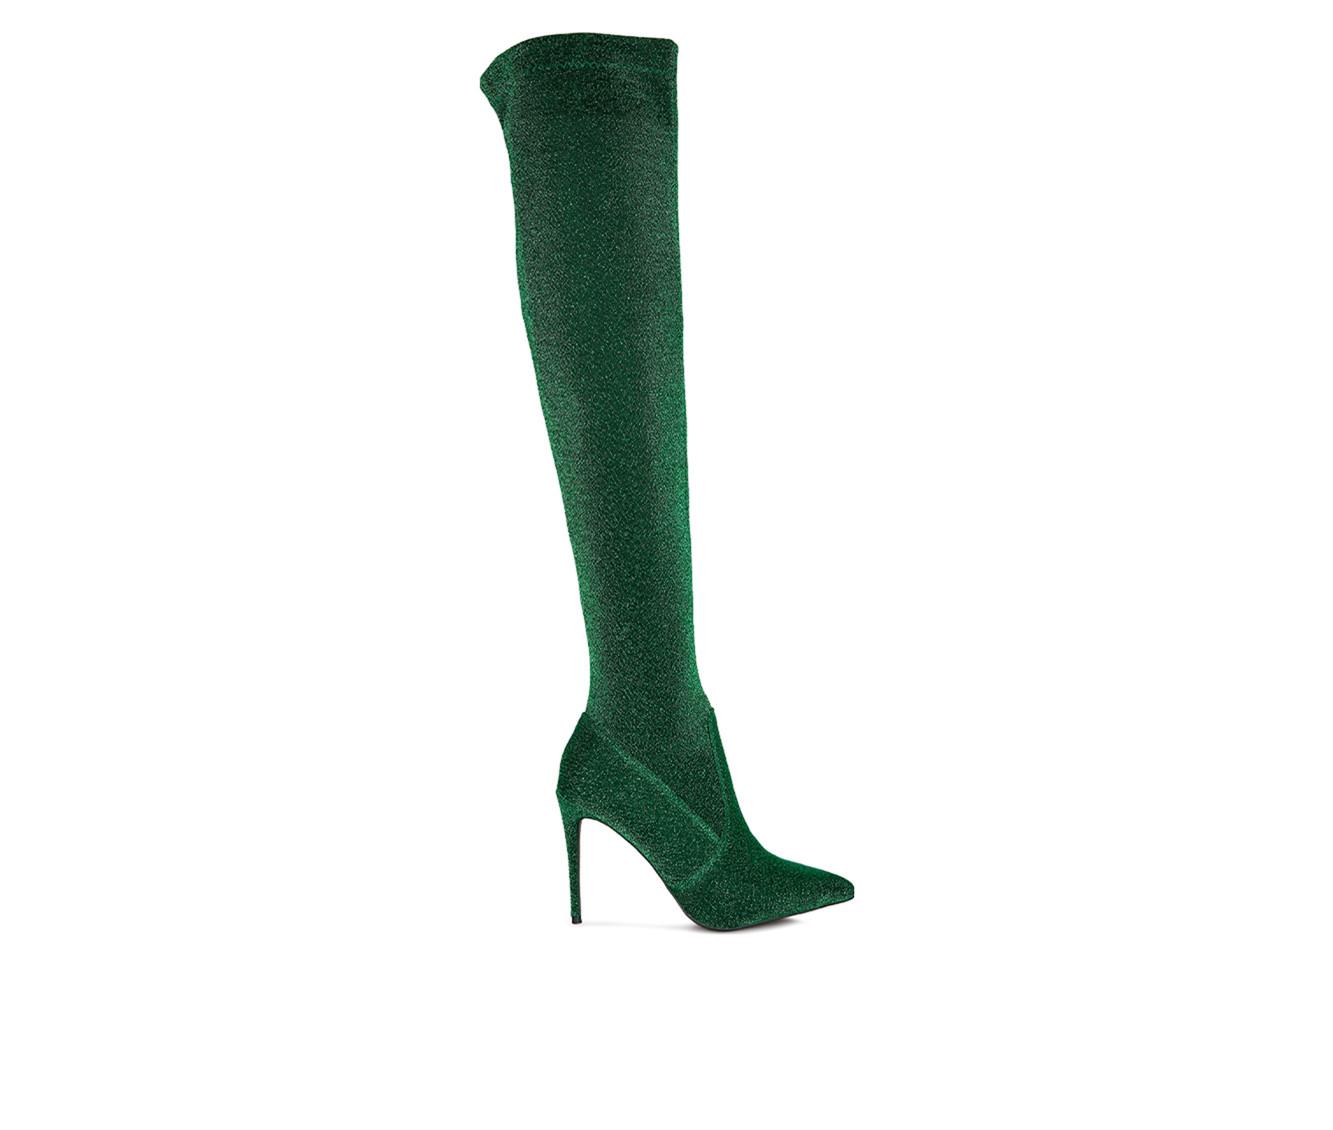 Women's London Rag Tigerlily Over The Knee Stiletto Boots